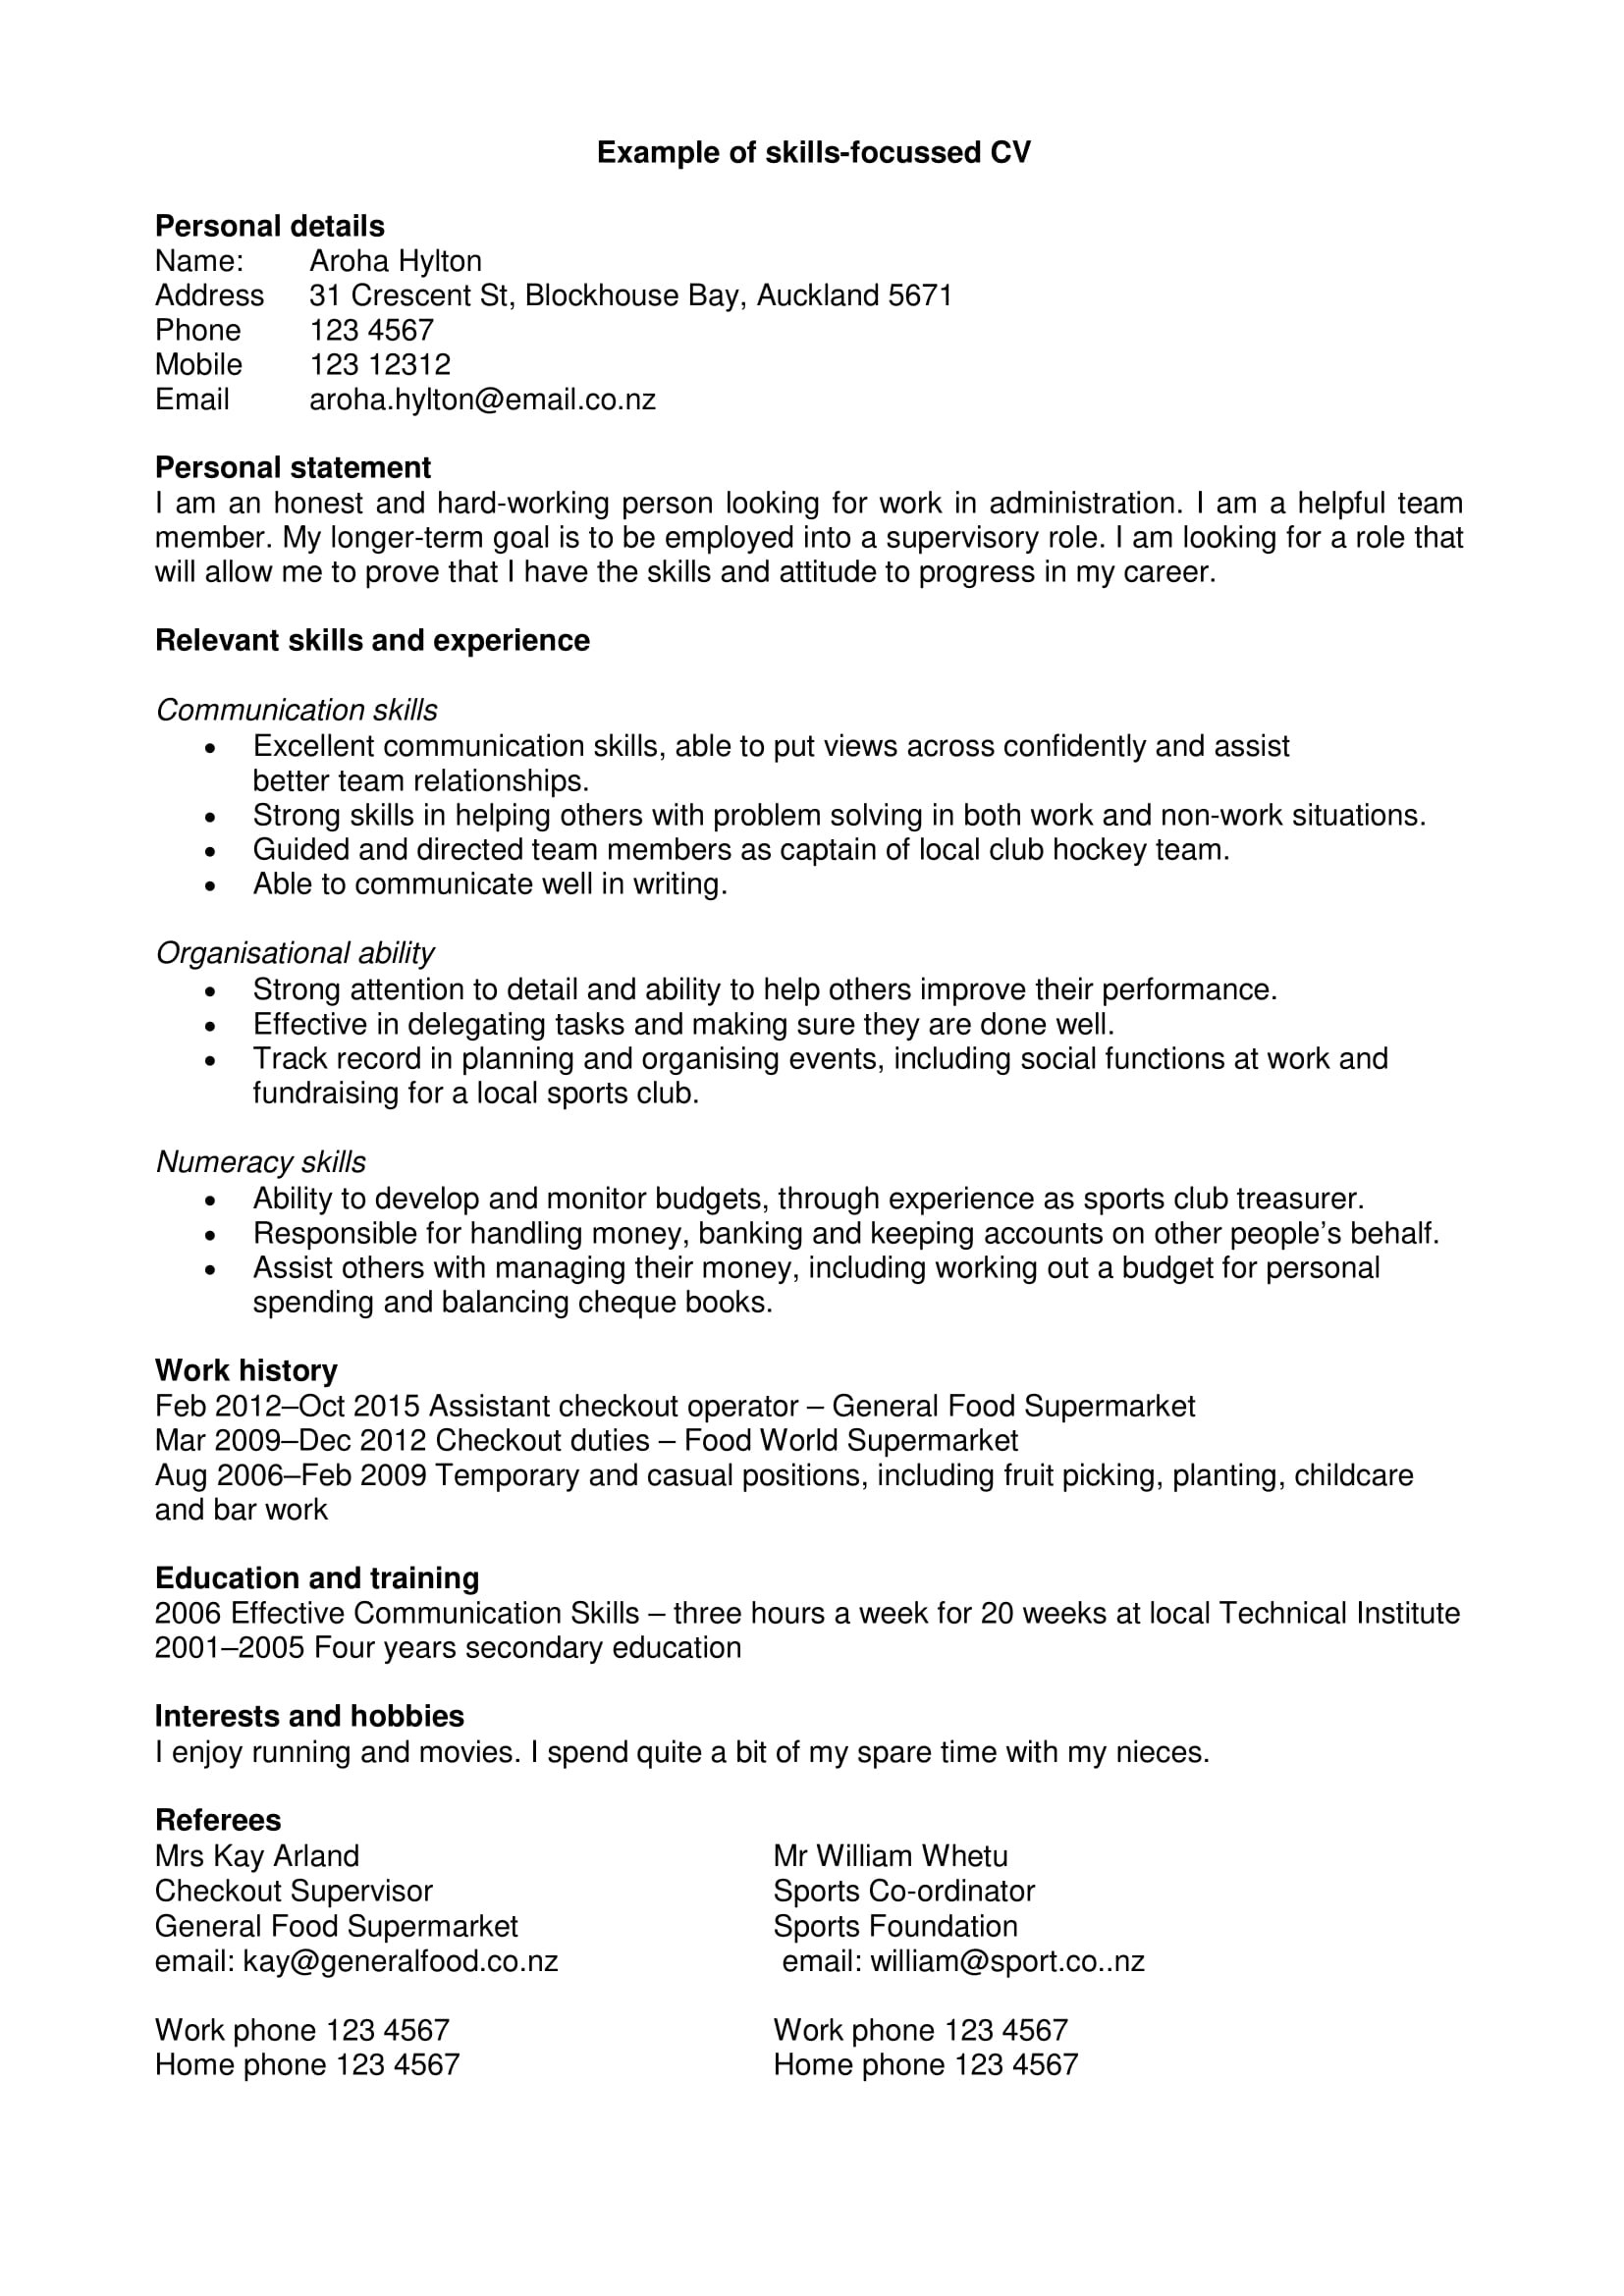 Sample Resume with A Personal Statement Personal Summary – 16lancarrezekiq Examples, format, Pdf Examples